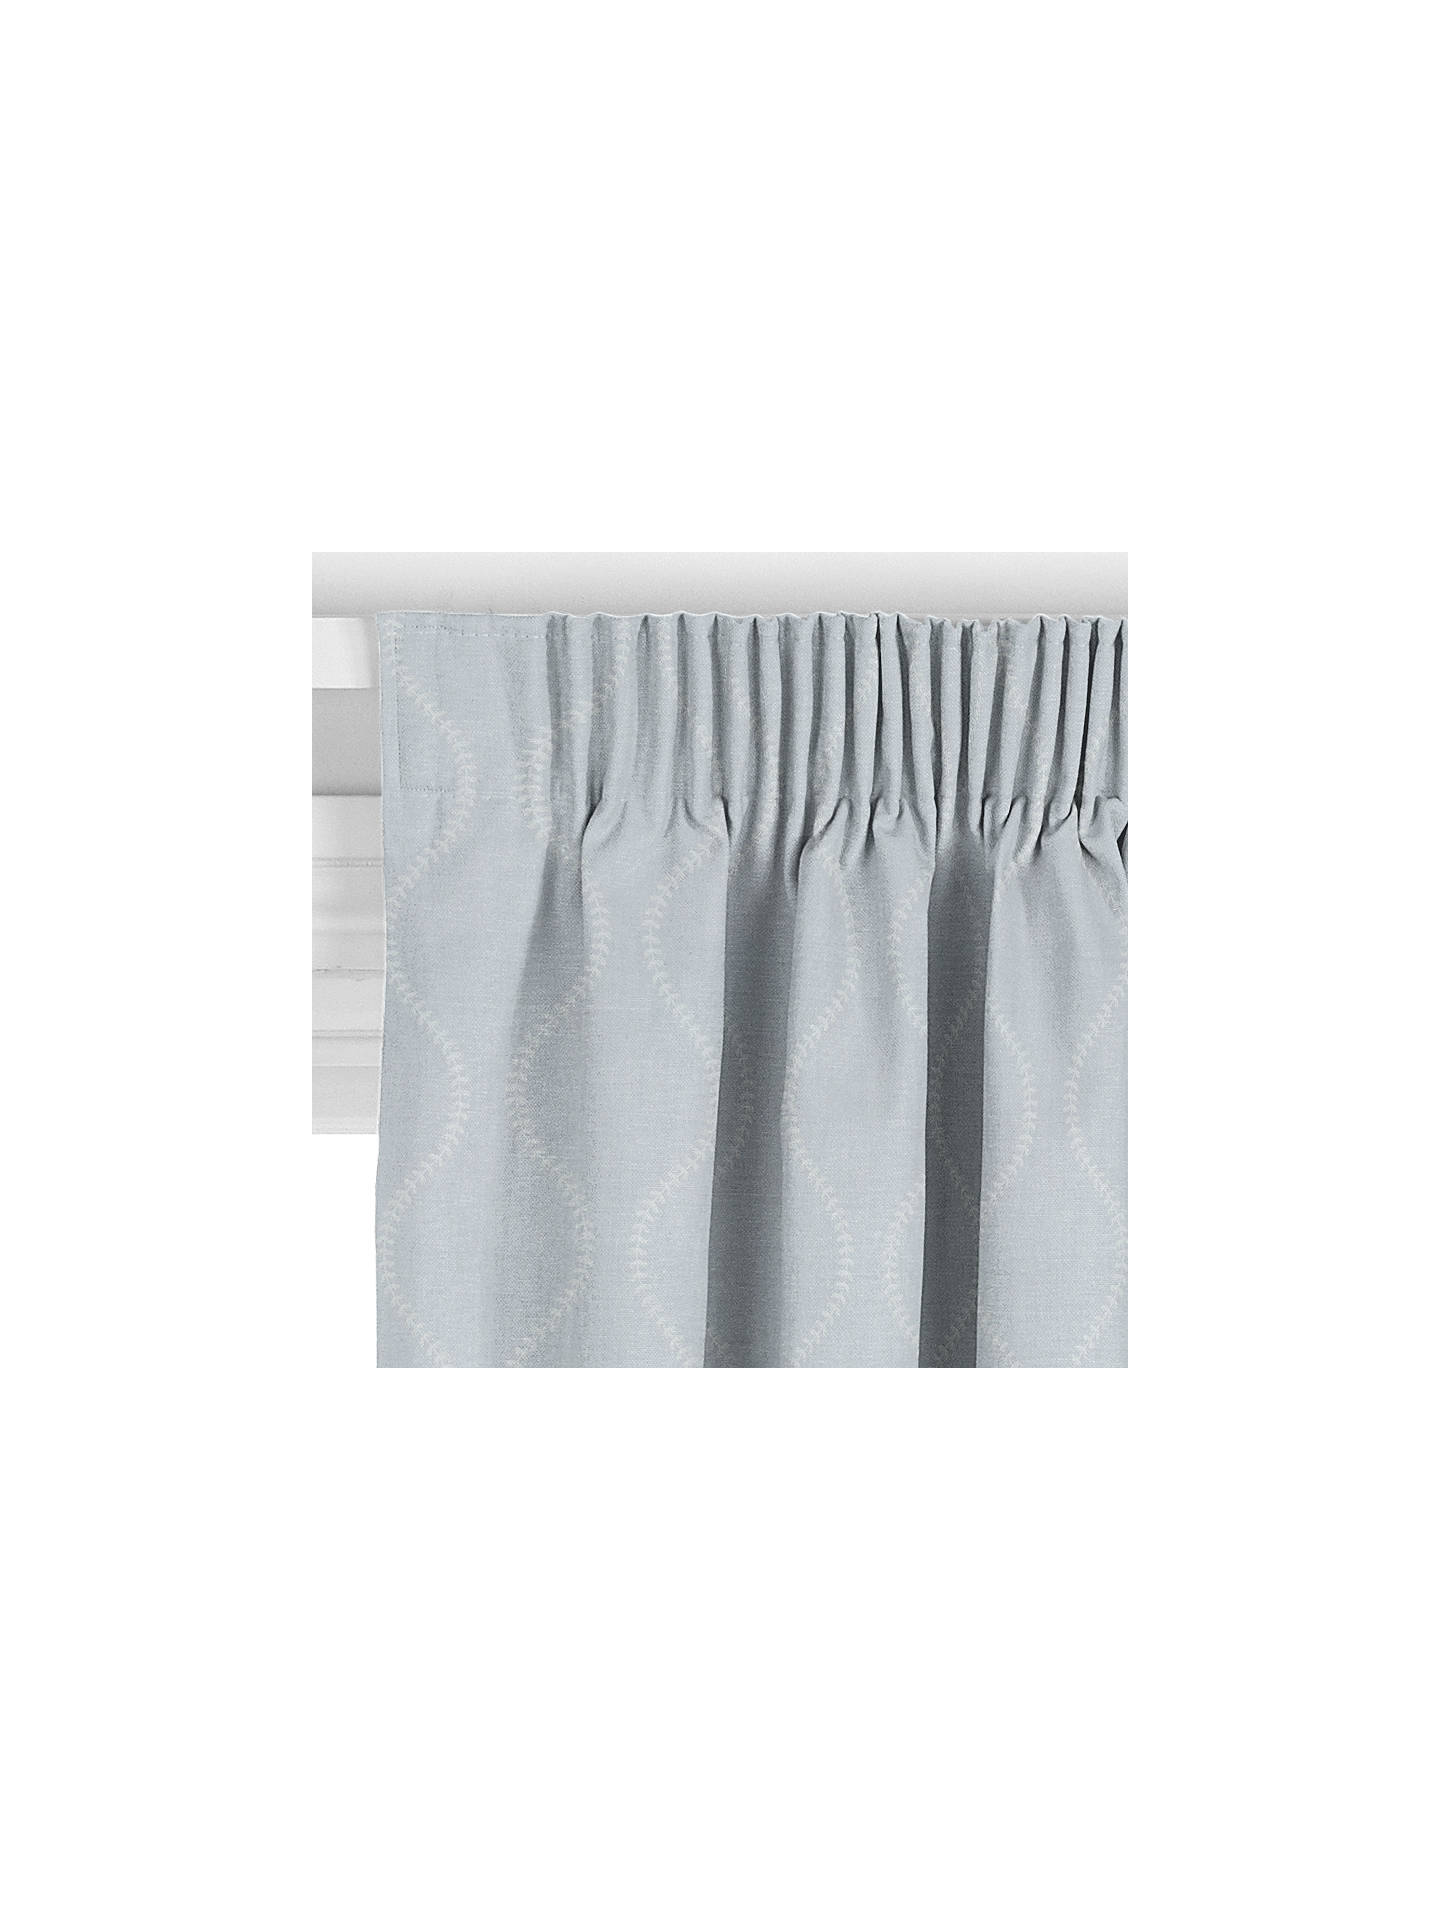 John Lewis Chattis Embroidery Made to Measure Curtains, Grey